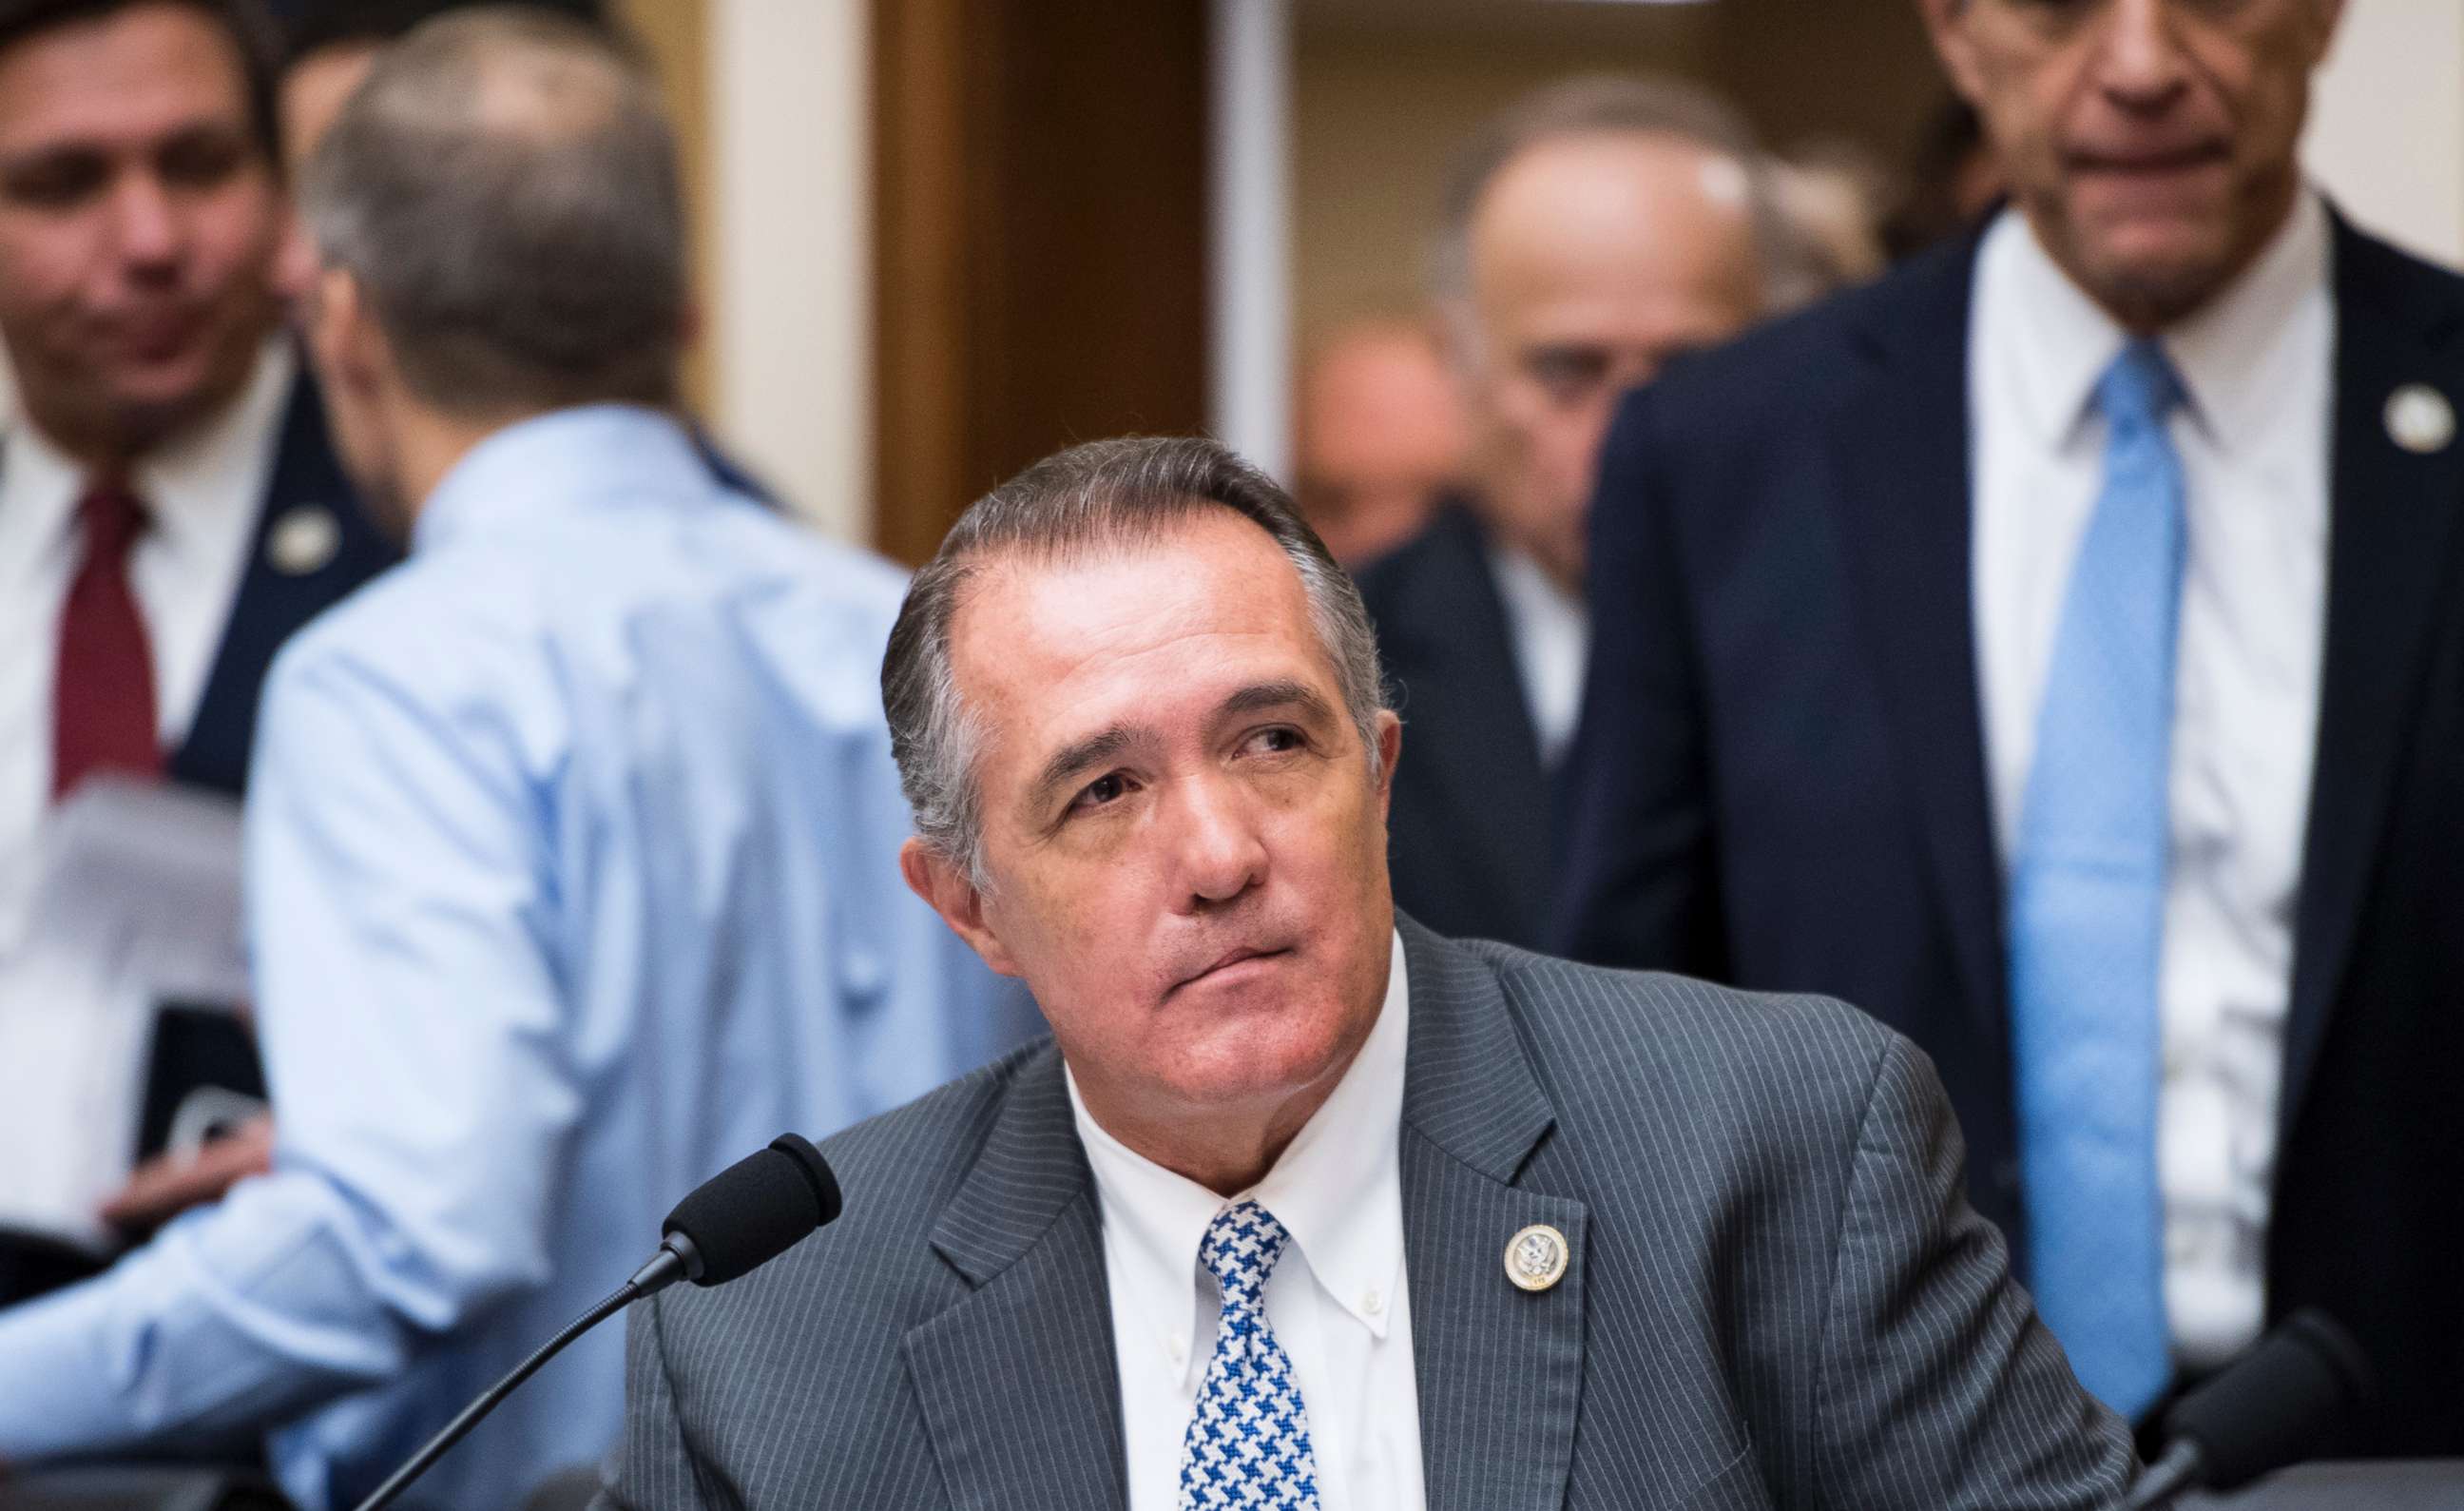 PHOTO: Rep. Trent Franks takes his seat as he arrives for the House Judiciary Committee hearing on oversight of the Federal Bureau of Investigation on Dec. 7, 2017.